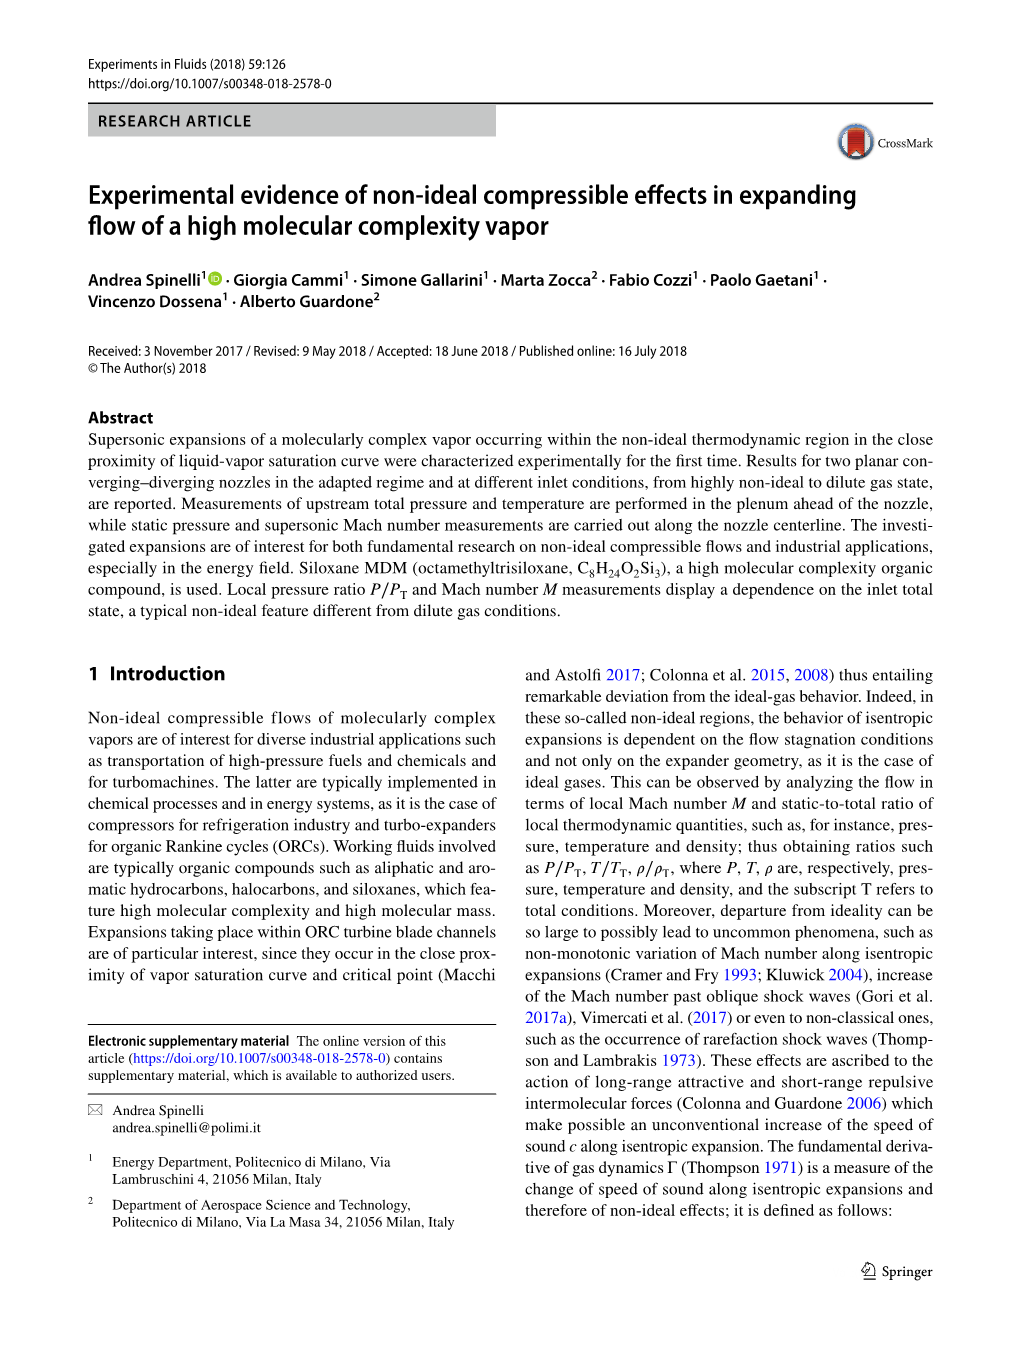 Experimental Evidence of Non-Ideal Compressible Effects in Expanding